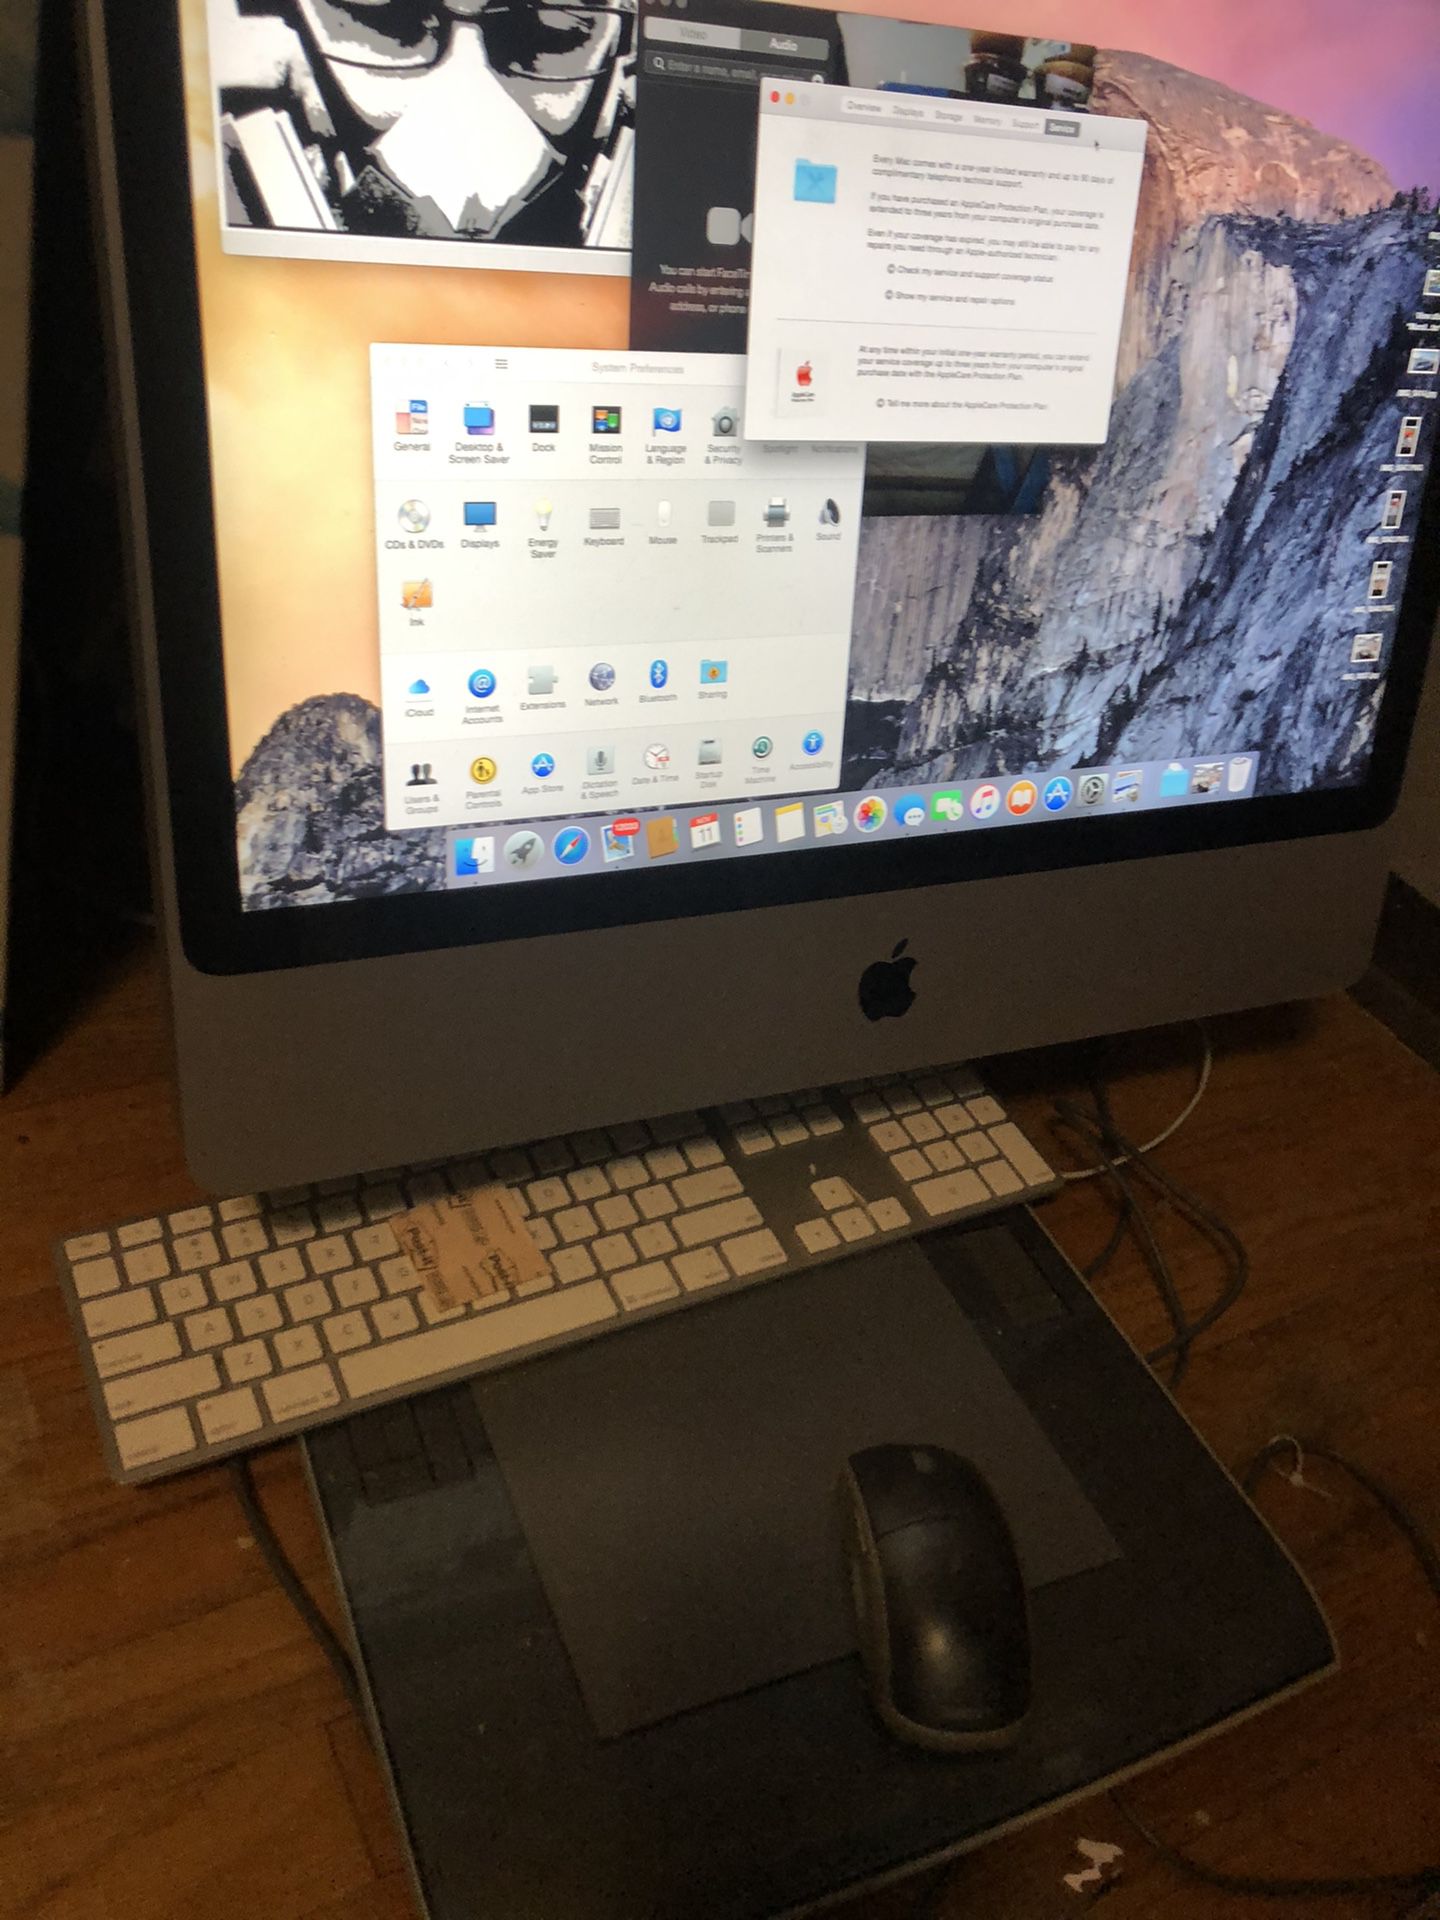 iMac computer with keyboard and drawing pad mouse and stylus